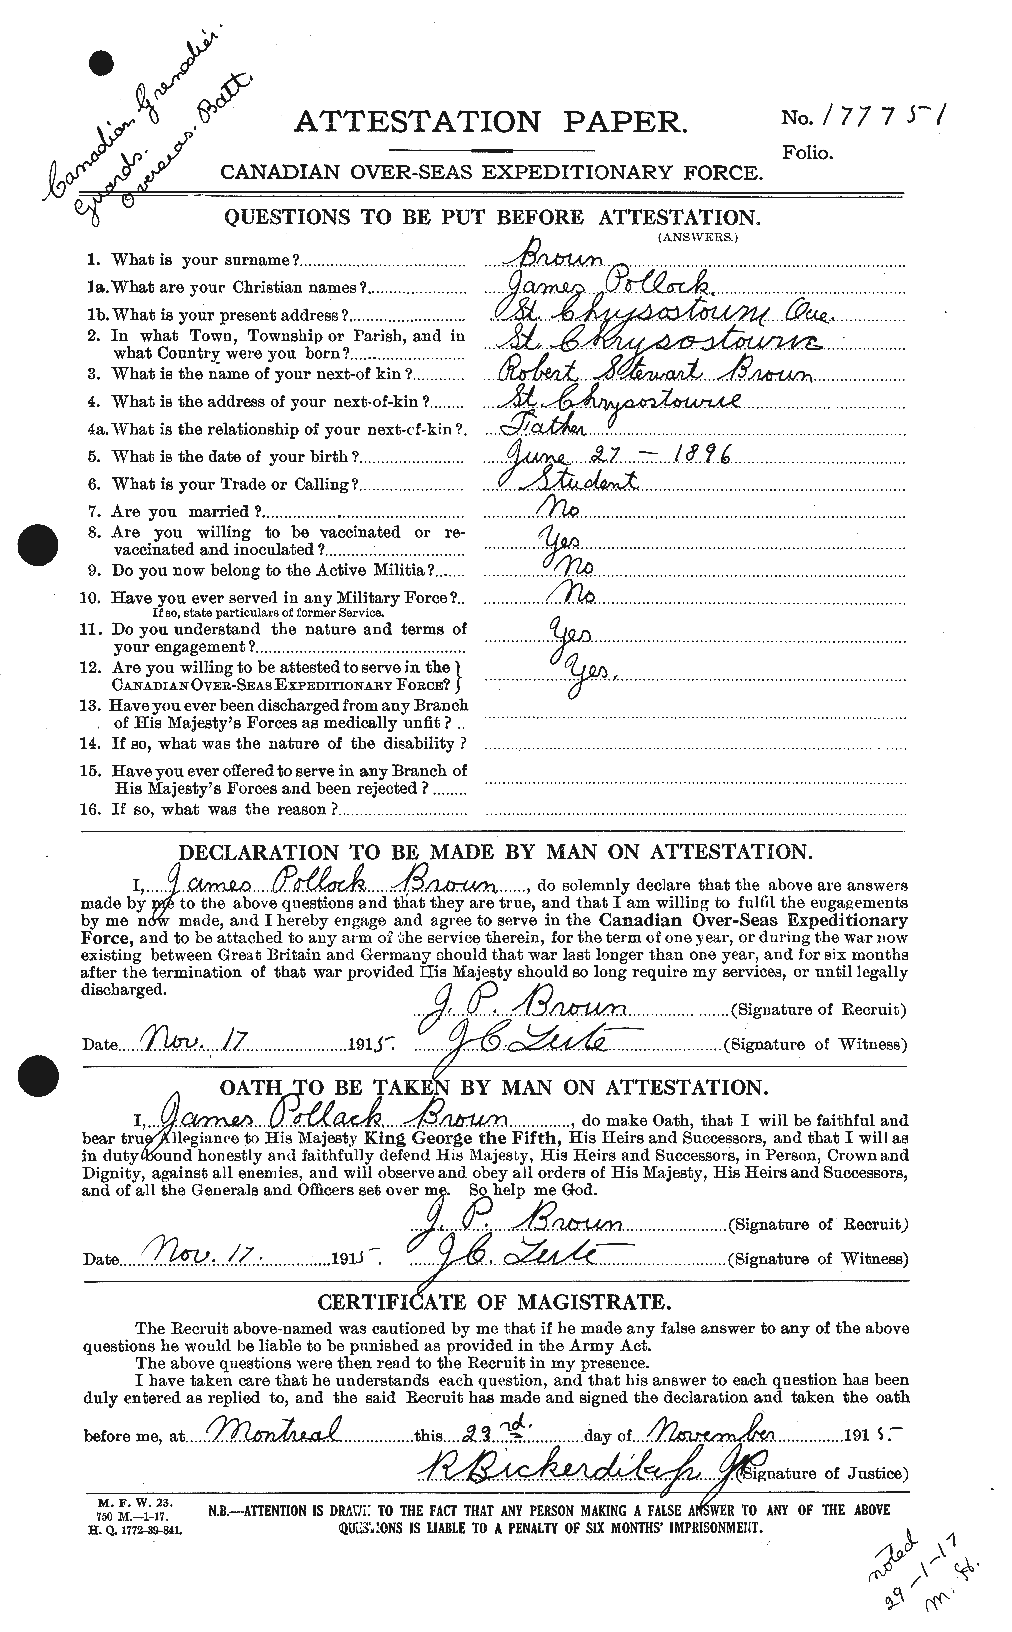 Personnel Records of the First World War - CEF 269570a